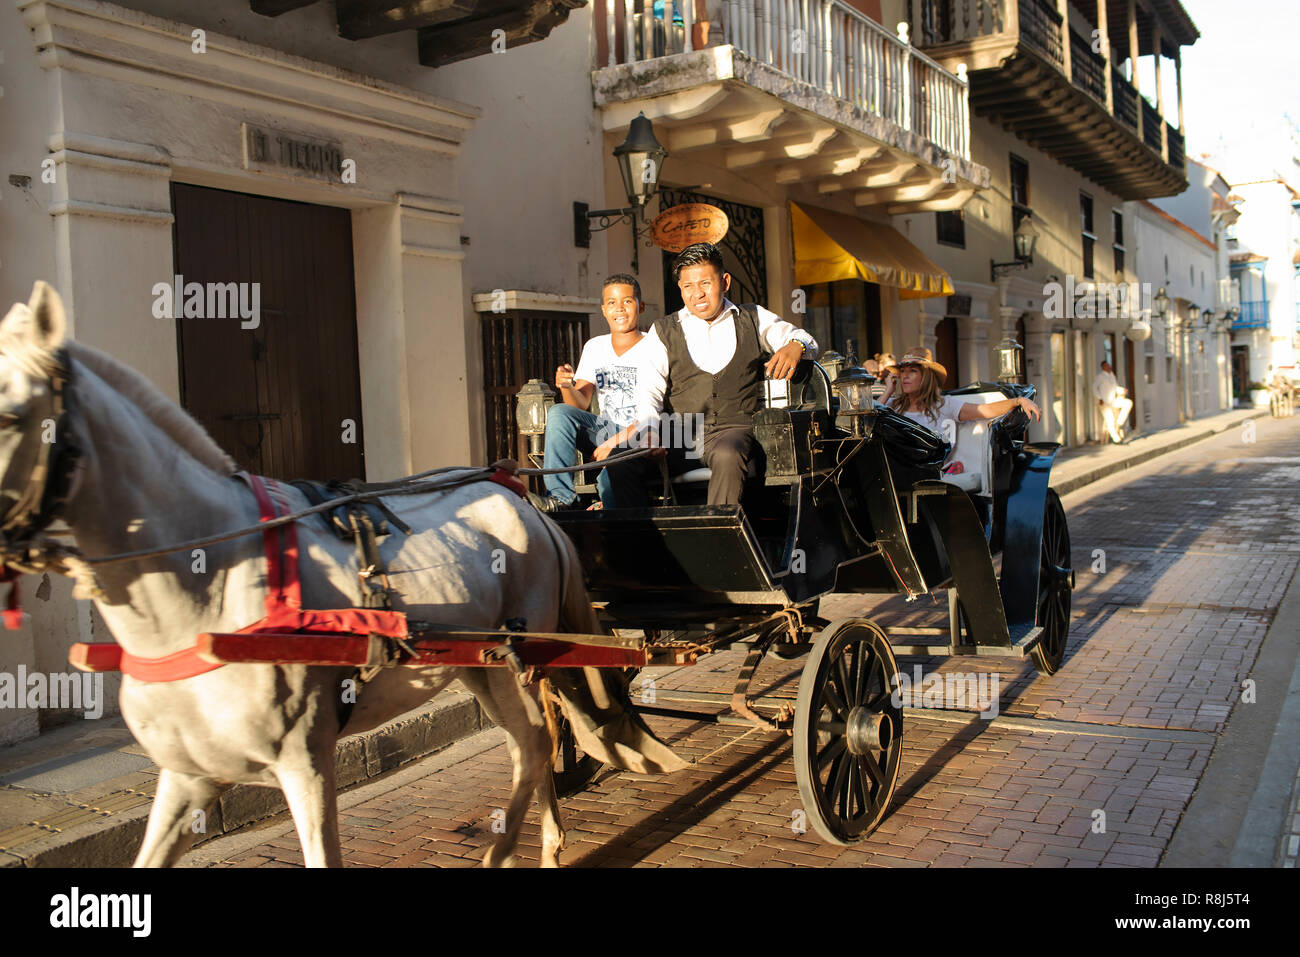 A horse cart with tourists speeding through the old town of Cartagena de Indias, Colombia. Oct 2018 Stock Photo